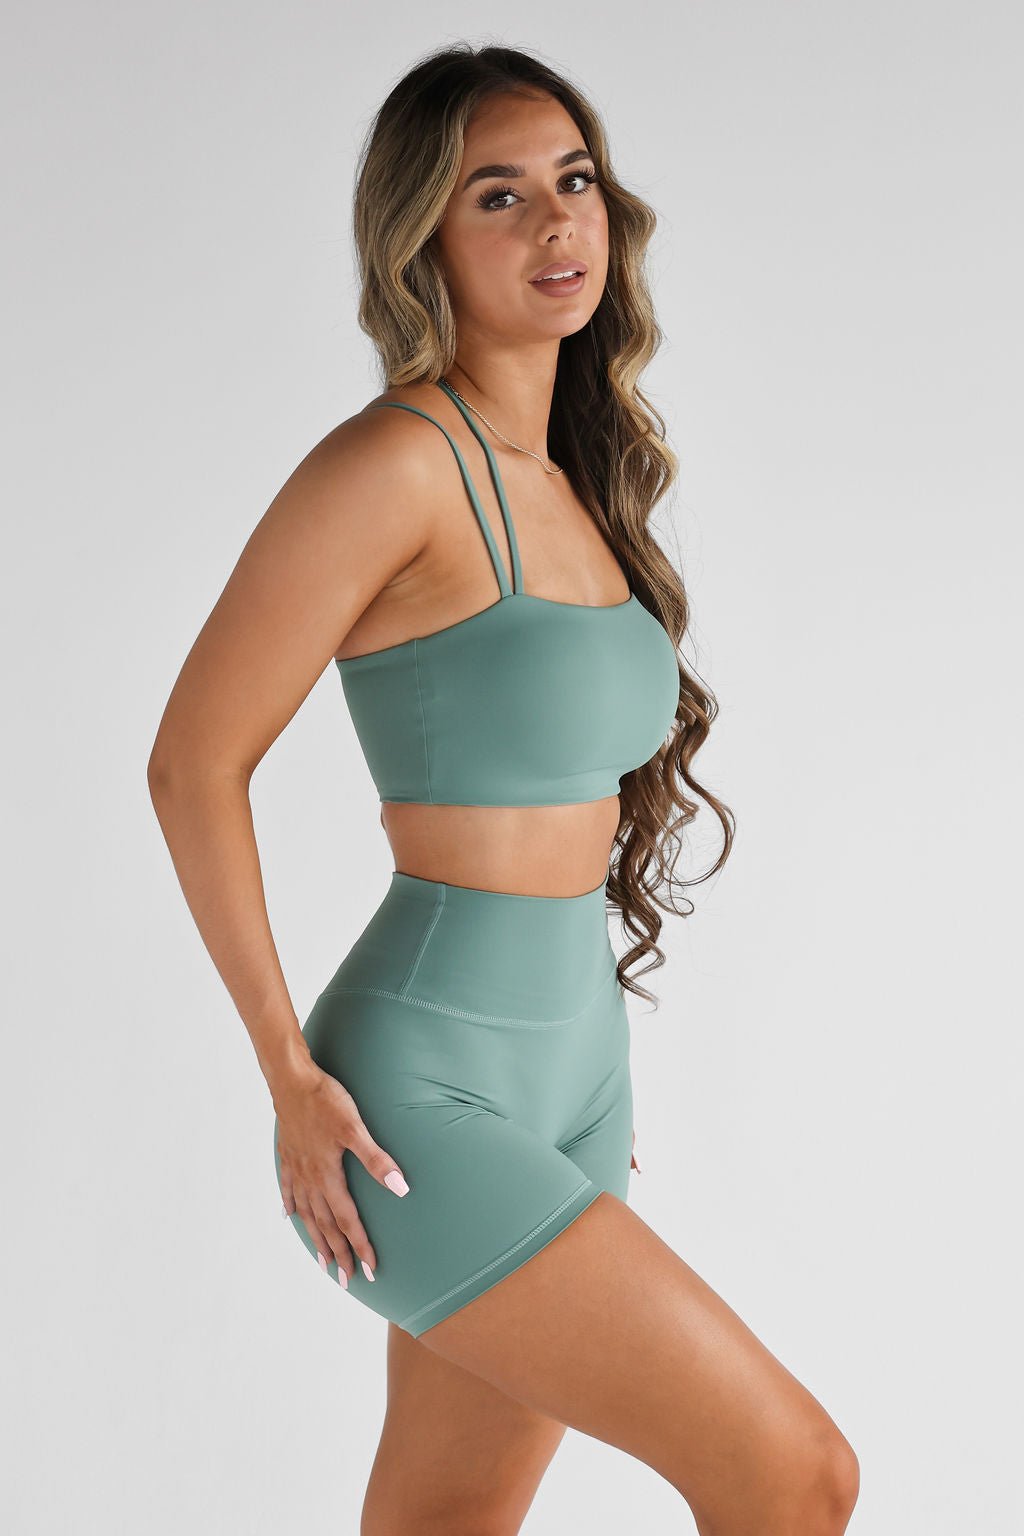 SCULPT Infinity Crop - Sage SHIPPING FROM 3/11 - LEELO ACTIVE